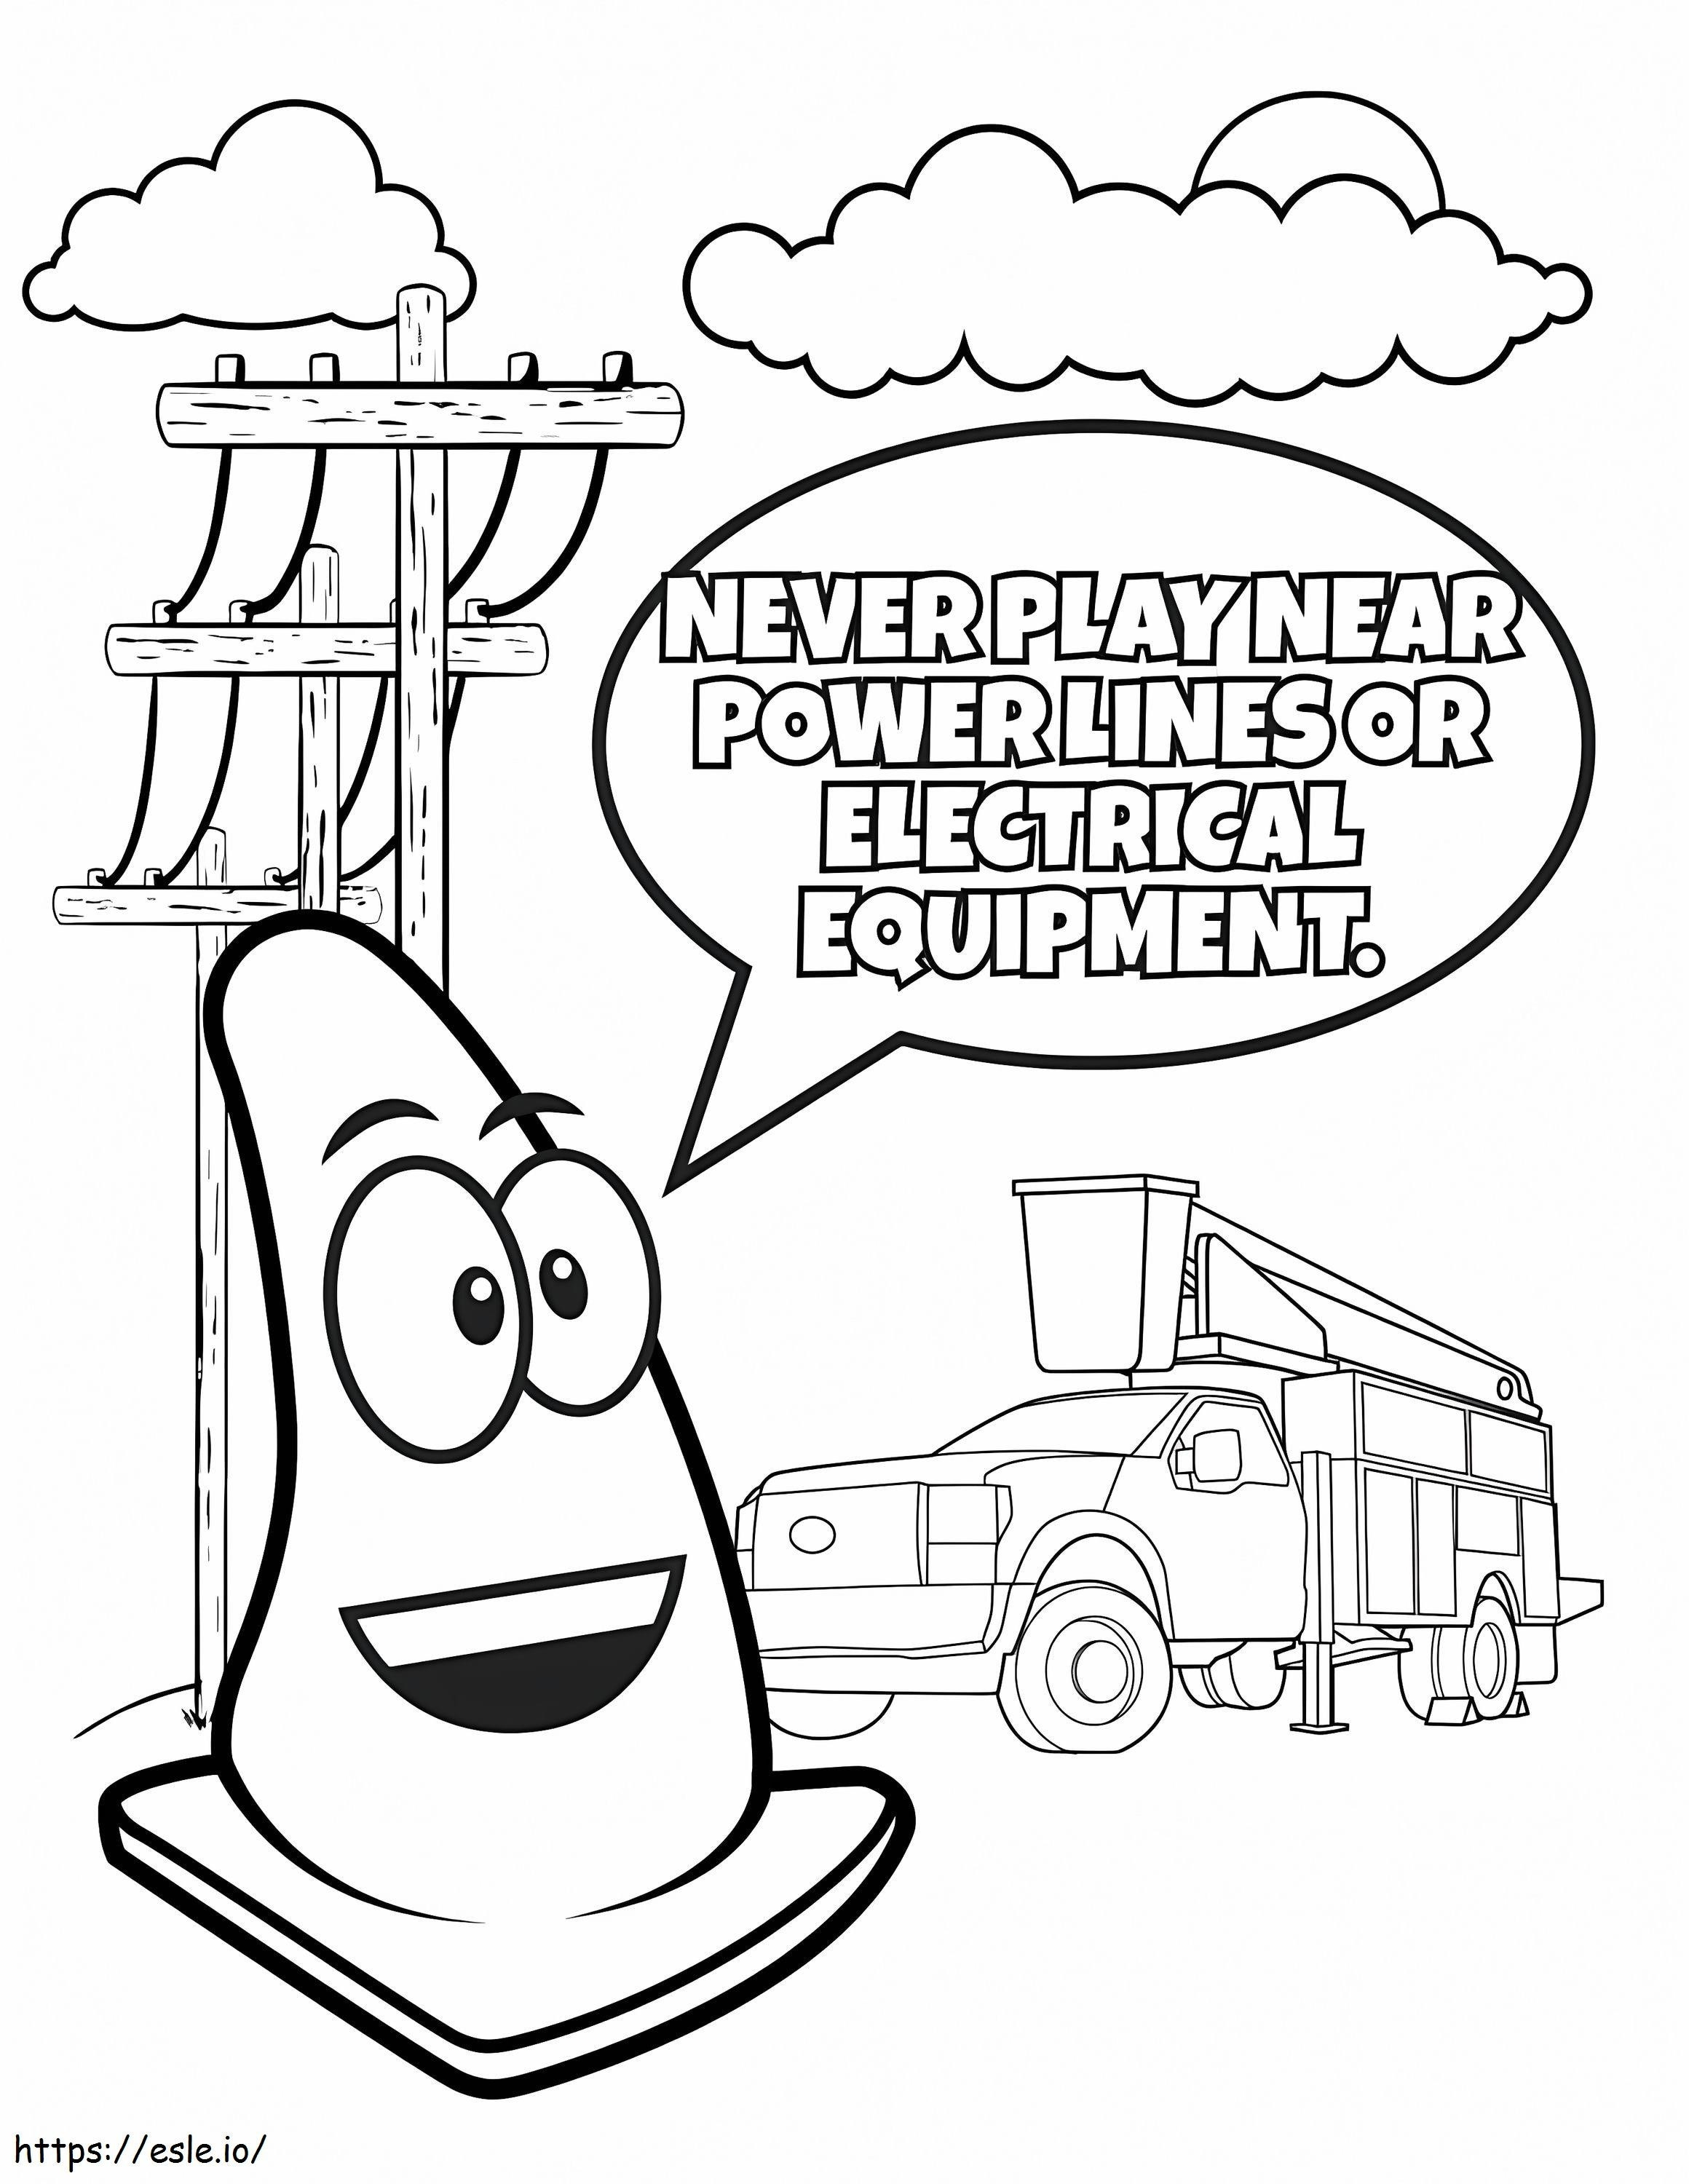 Electrical Safety 2 coloring page